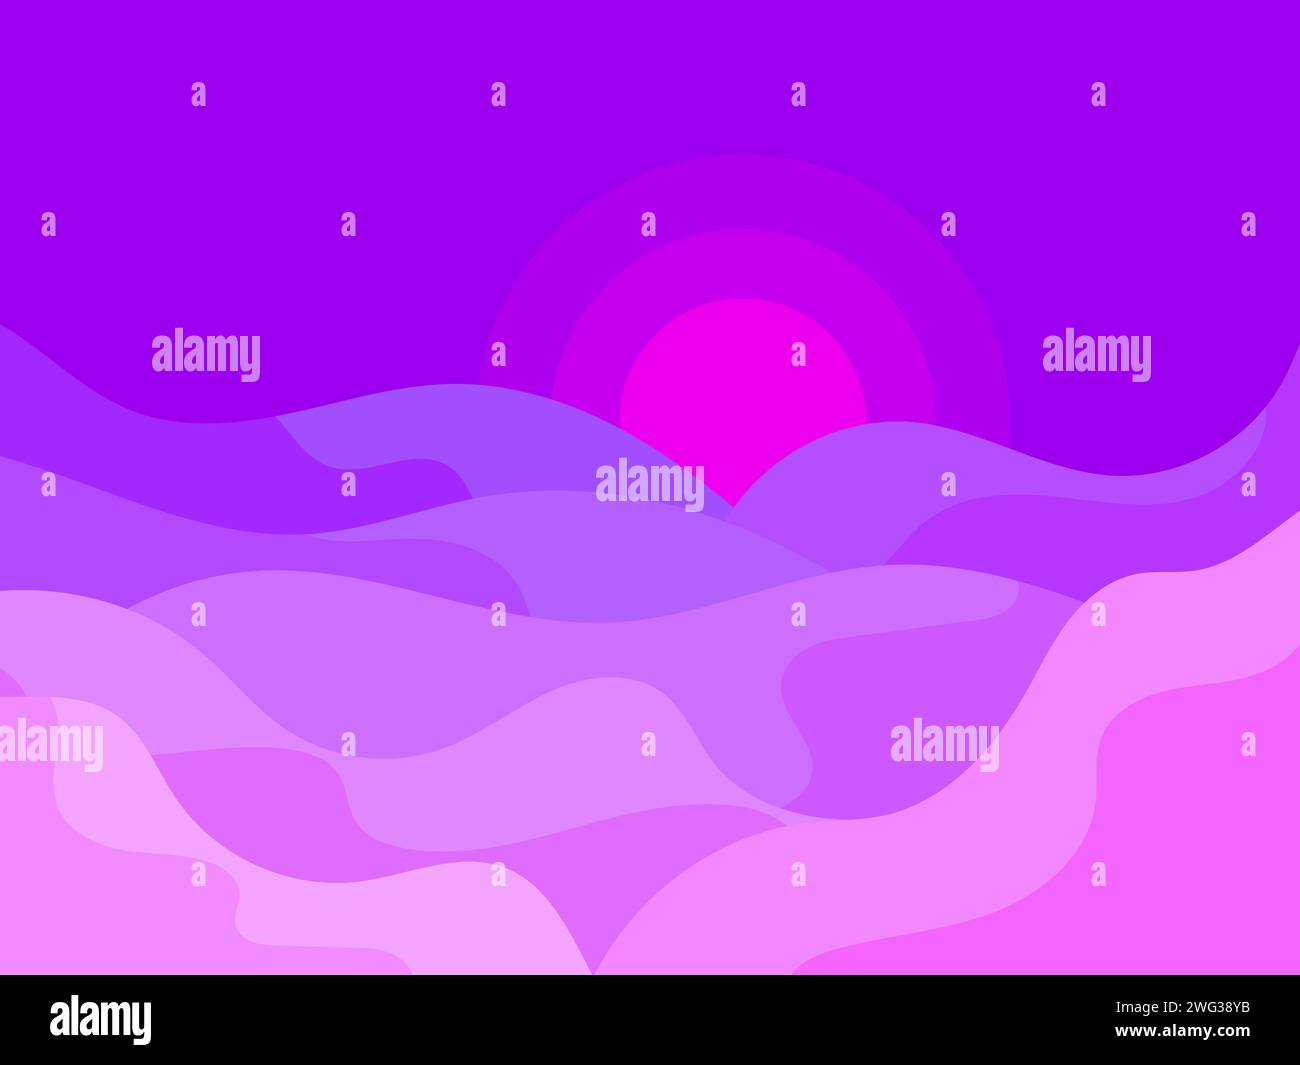 Landscape of wavy hills at sunset in a minimalist style. Dusk over the hills, purple and lilac shades. Boho decor. Design for printing banners, poster Stock Vector